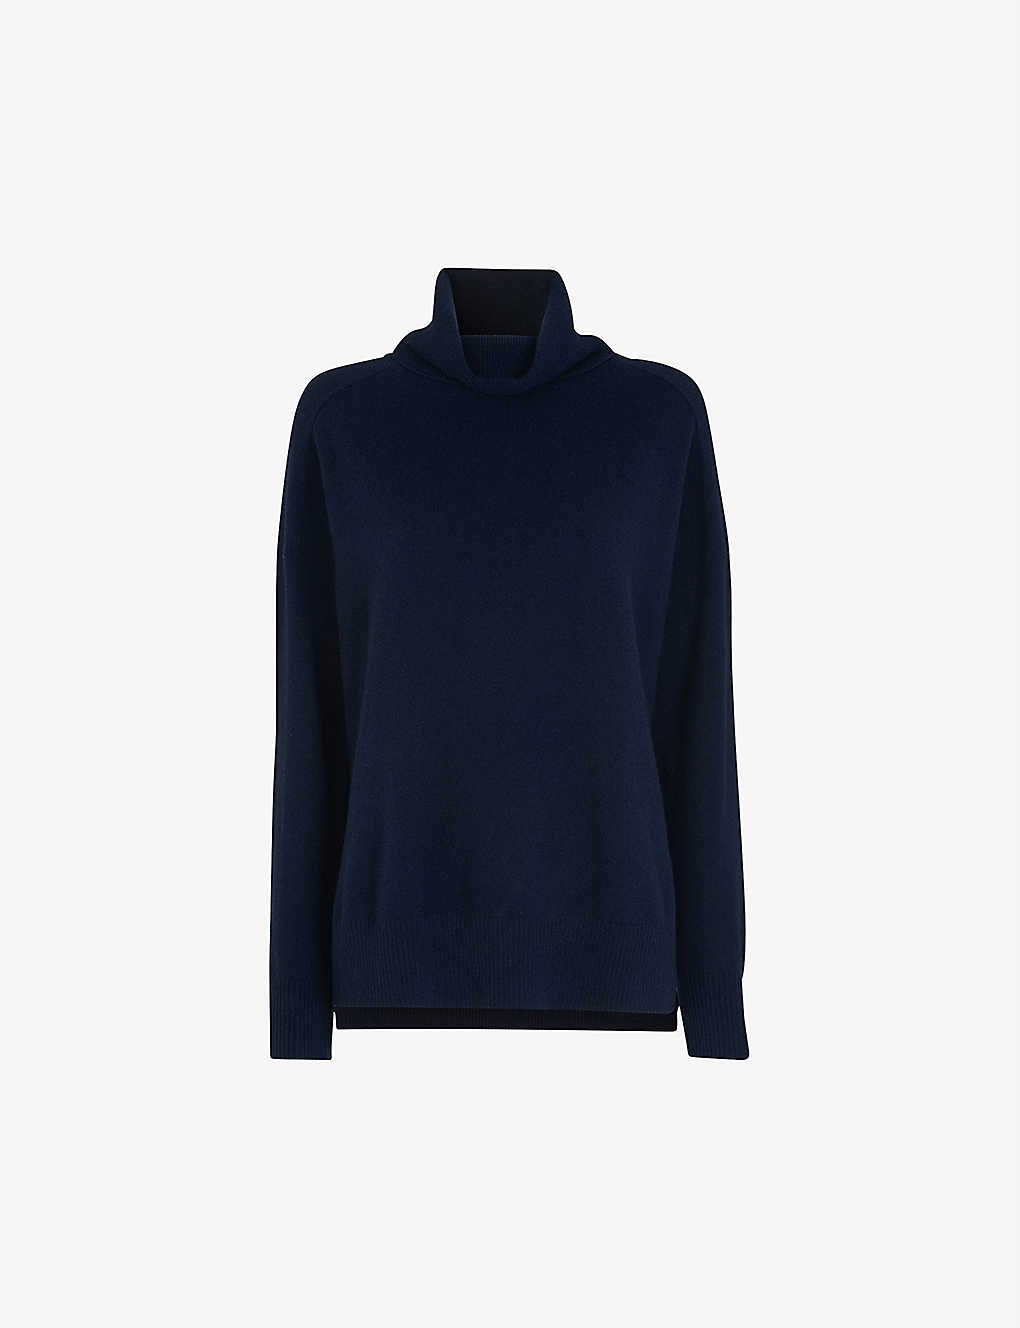 Whistles Womens Navy Roll-neck Cashmere Jumper